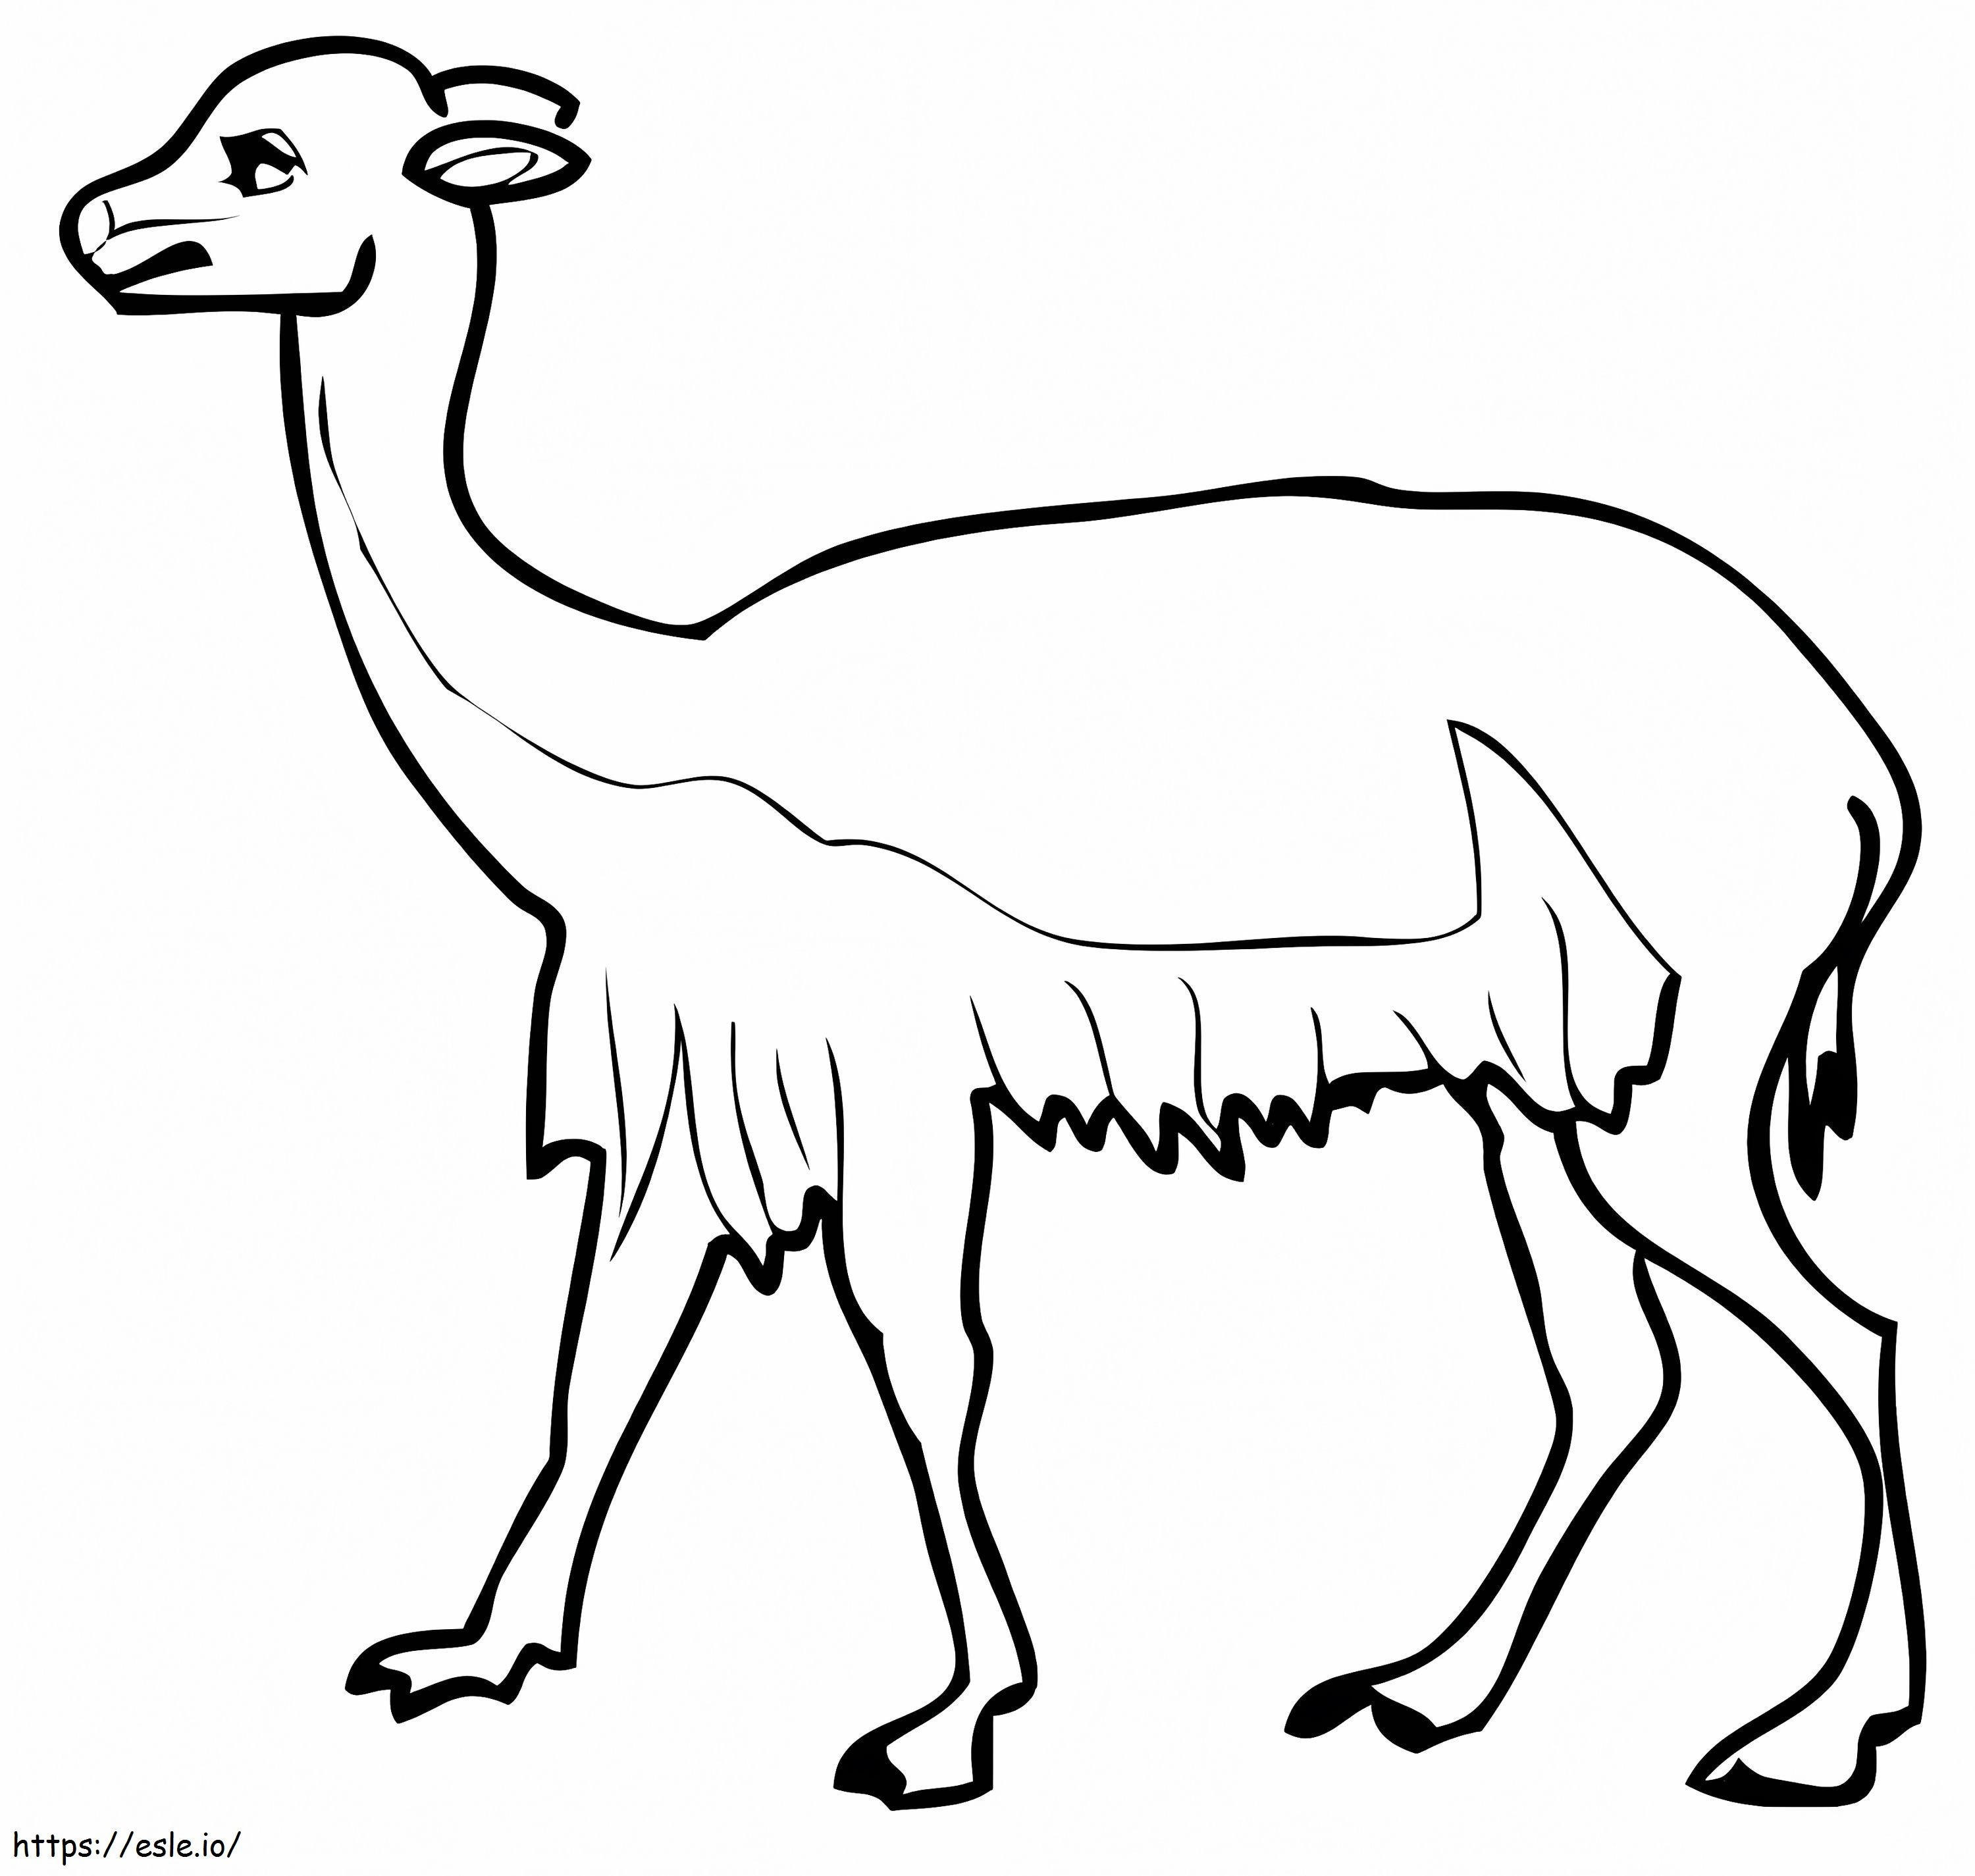 Normal Vicuna coloring page